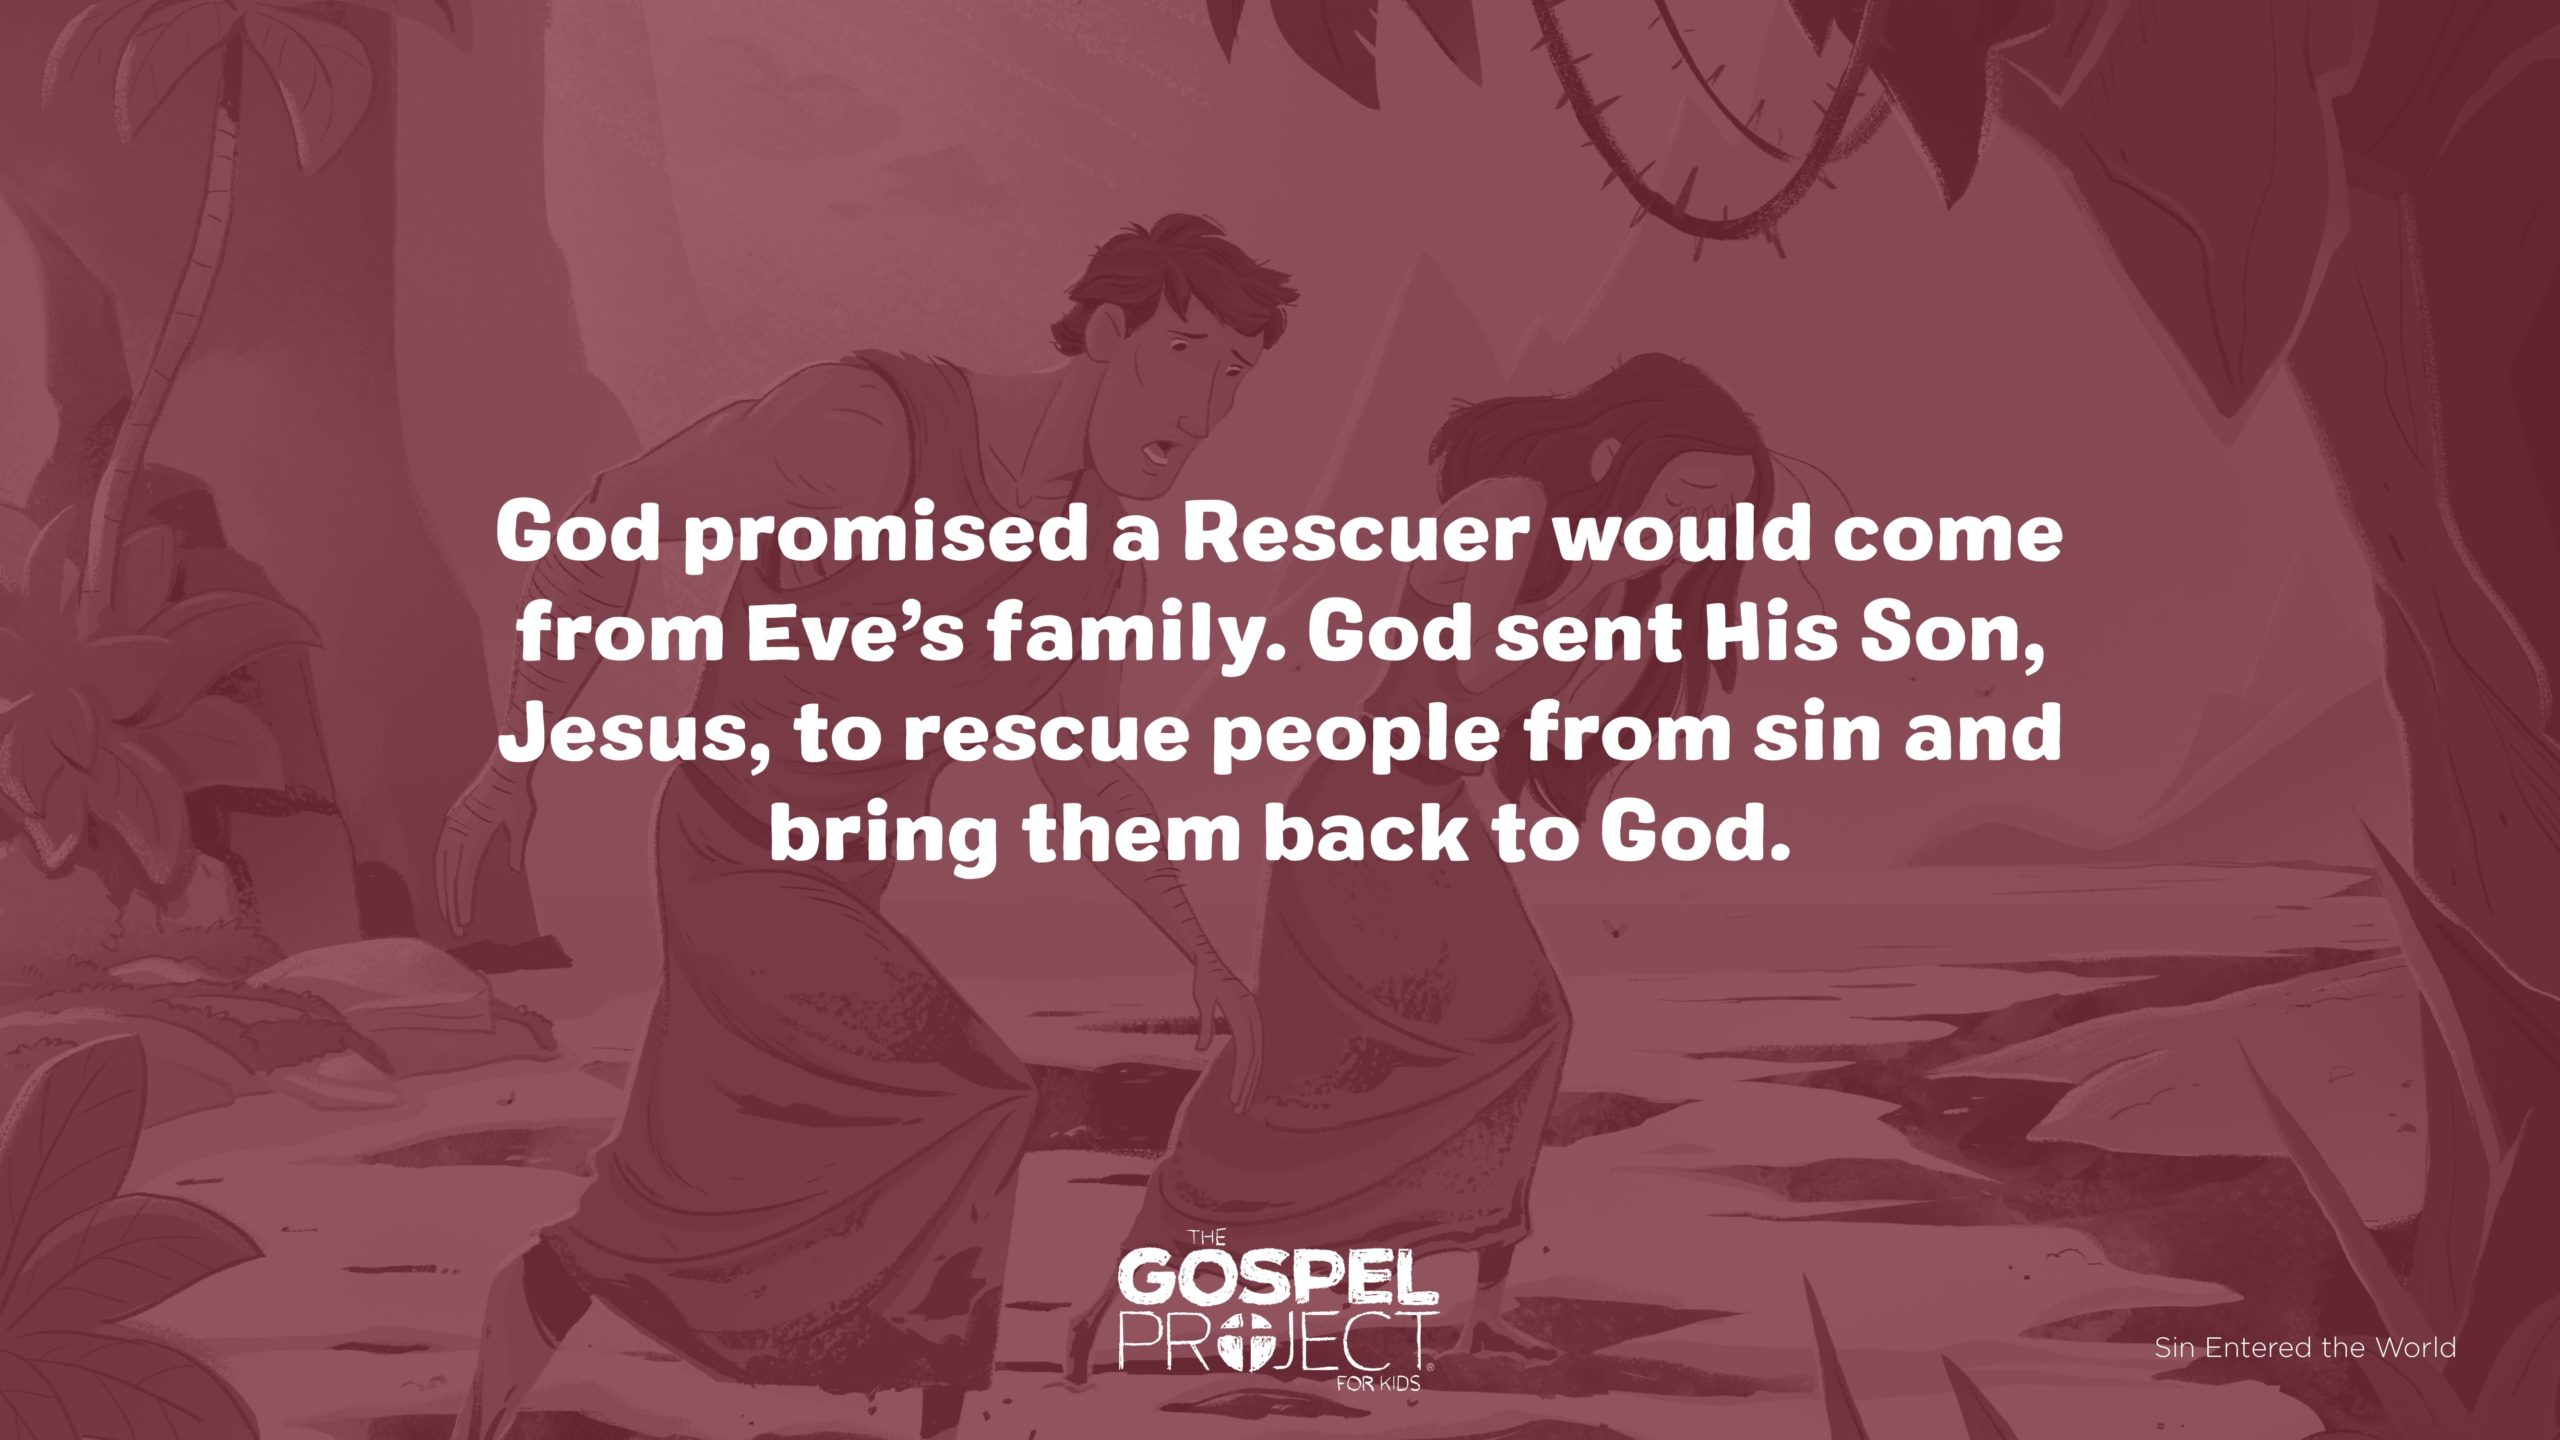 the-gospel-project-the-gospel-project